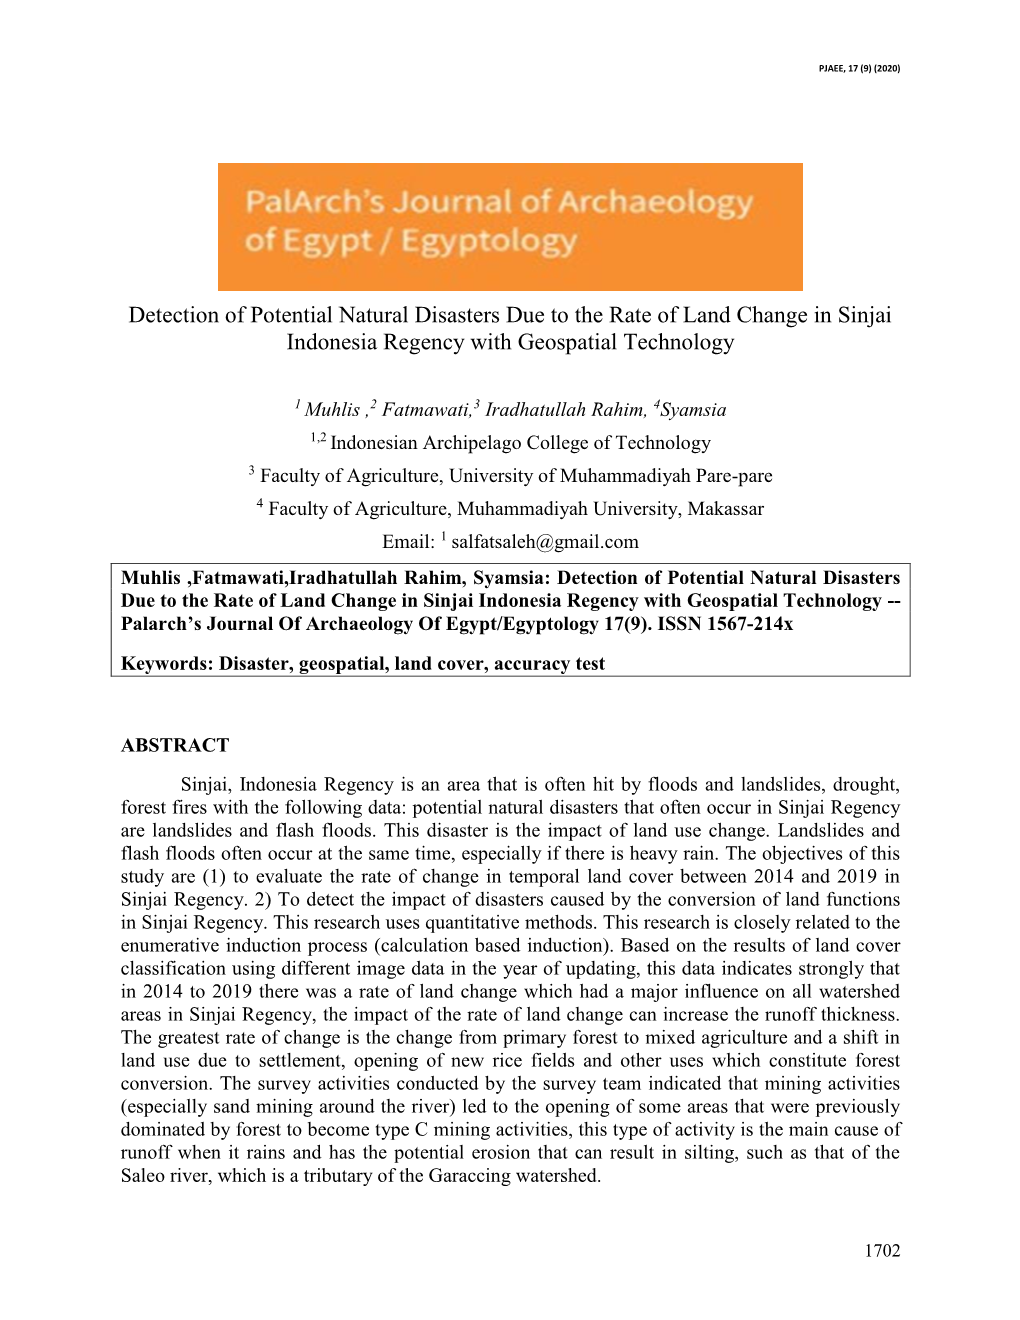 Detection of Potential Natural Disasters Due to the Rate of Land Change in Sinjai Indonesia Regency with Geospatial Technology